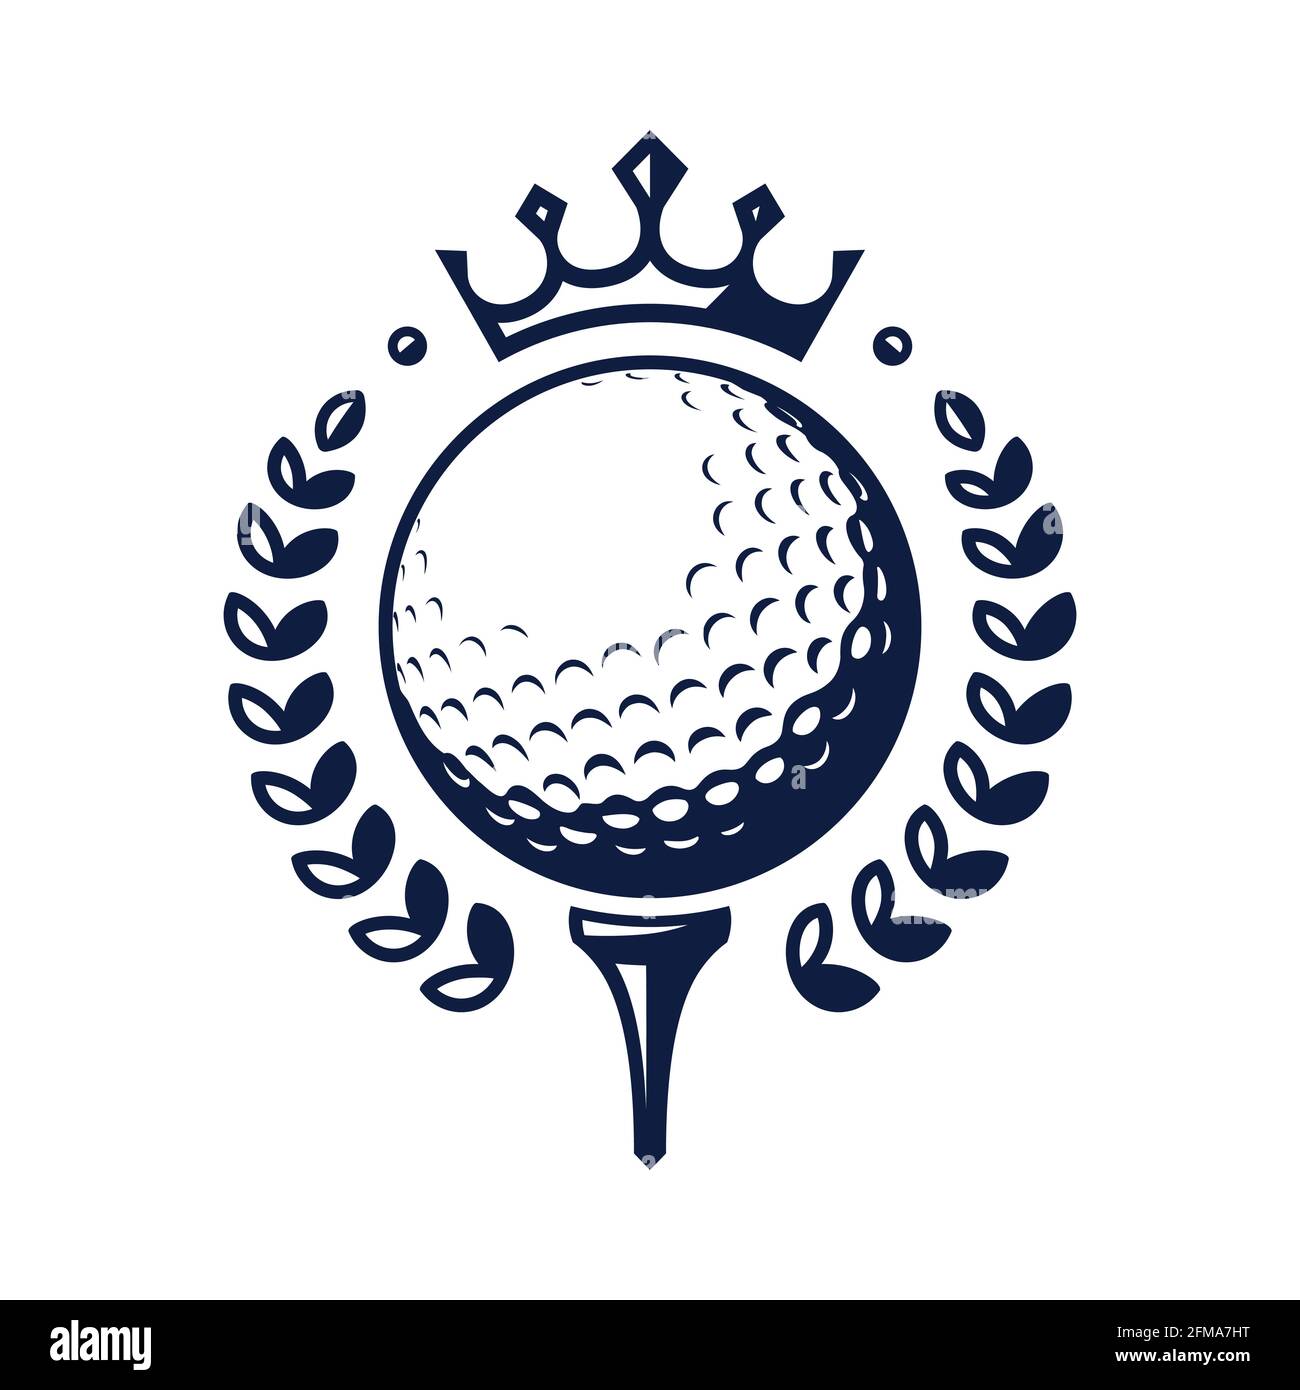 Golf ball vector logo. Golf ball on tee with wreath and crown. Vector illustration, isolated on a white background Stock Vector